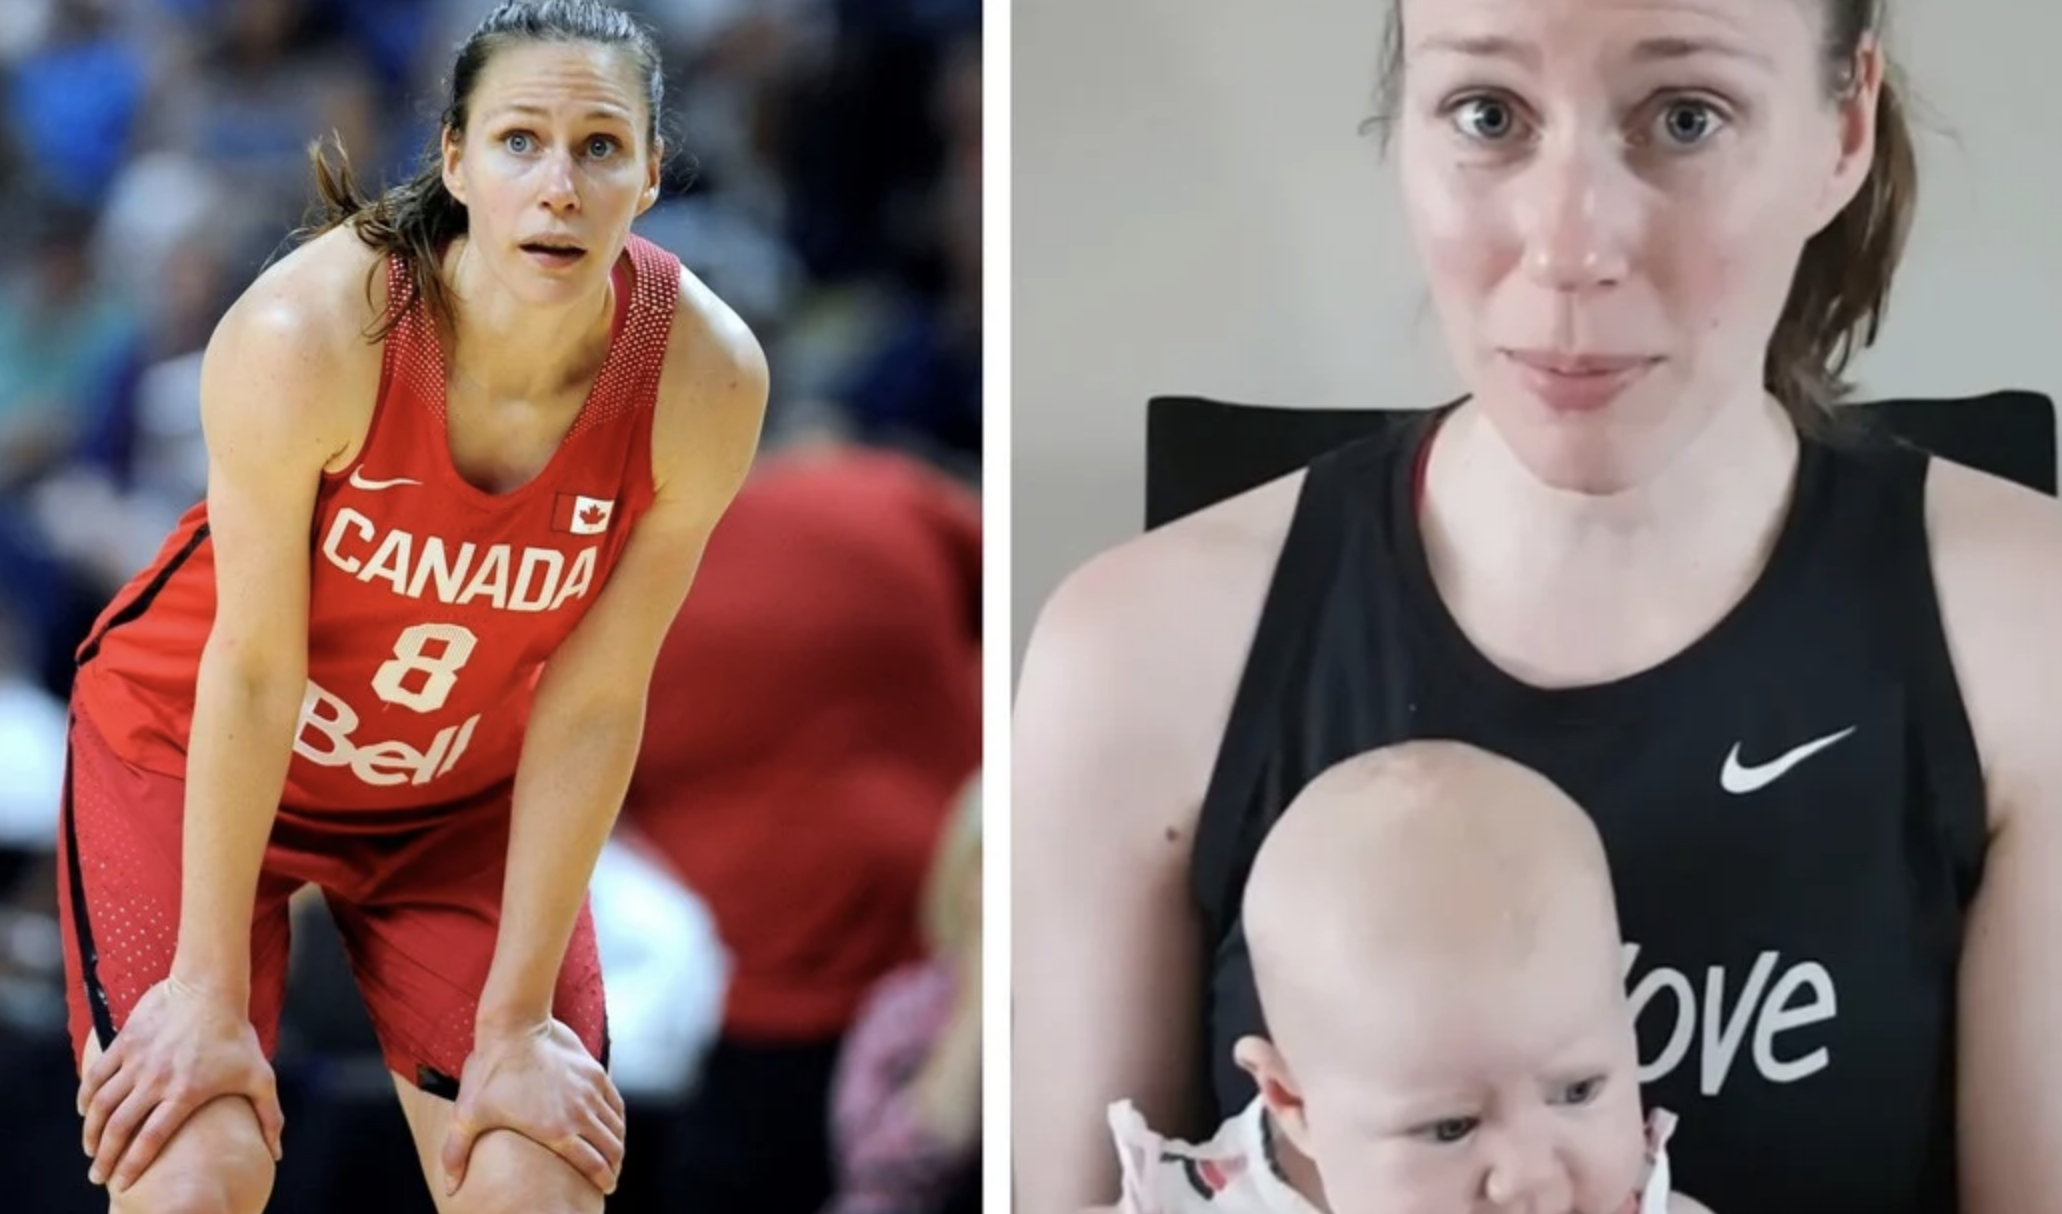 Candian basketball player being forced to decide between being a breastfeeding mom or Olympic athlete